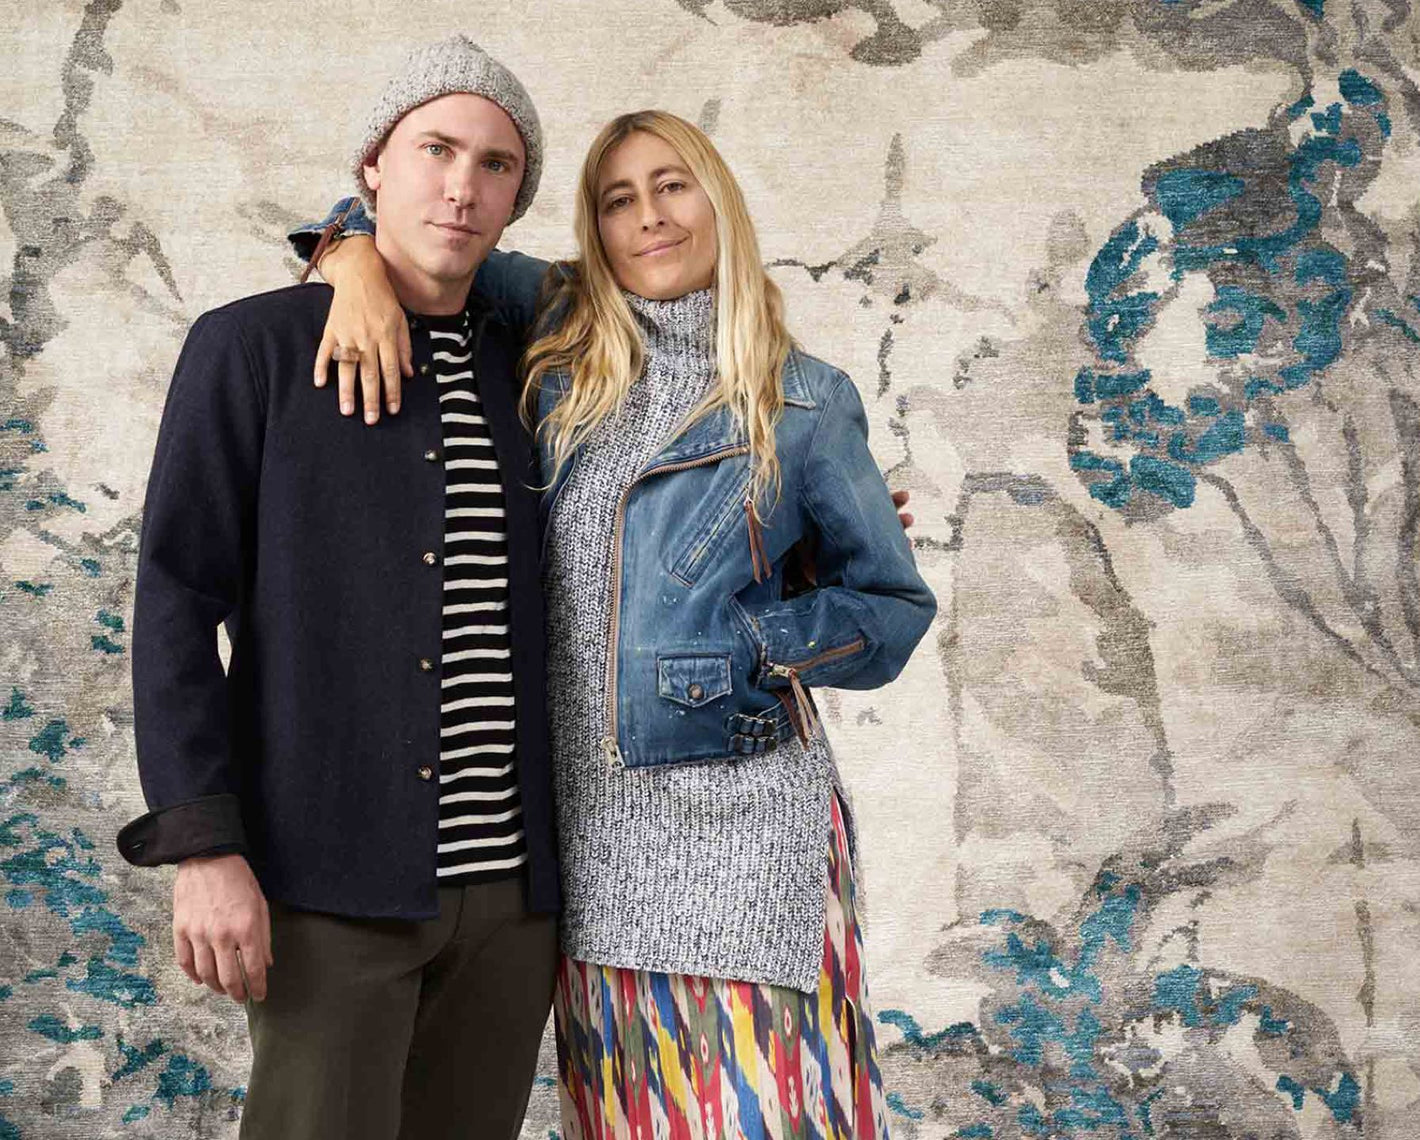 A man and woman posing for a photo in front of a floral wallpaper